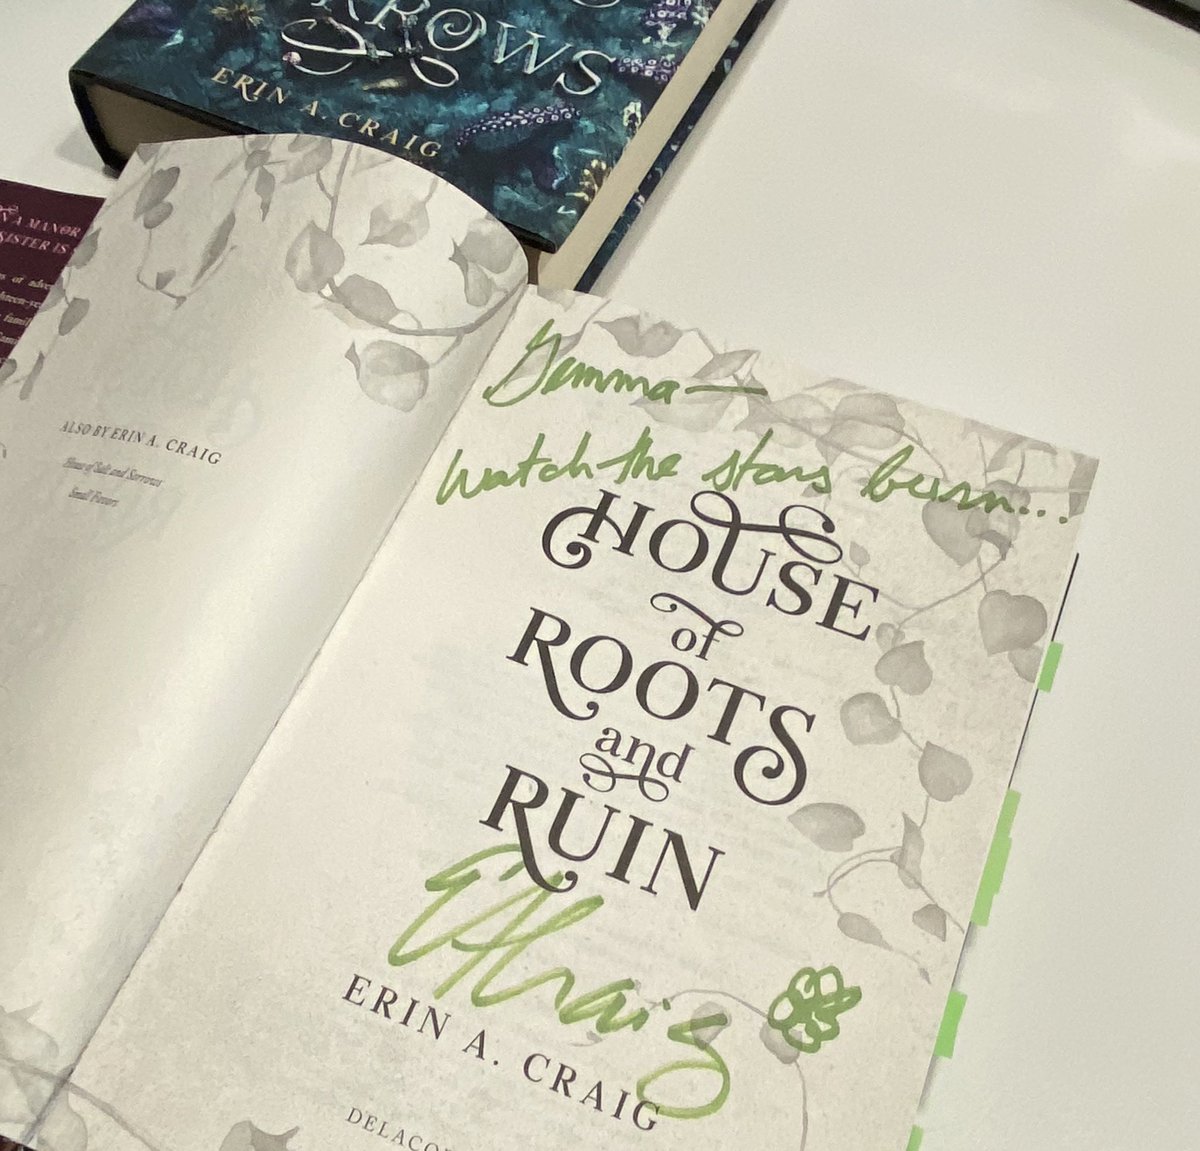 Four days since I finished House of Roots and Ruin by Erin A. Craig @Penchant4Words and I’m still thinking about the ending like… 🫣#HouseOfRootsAndRuin #ErinACraig